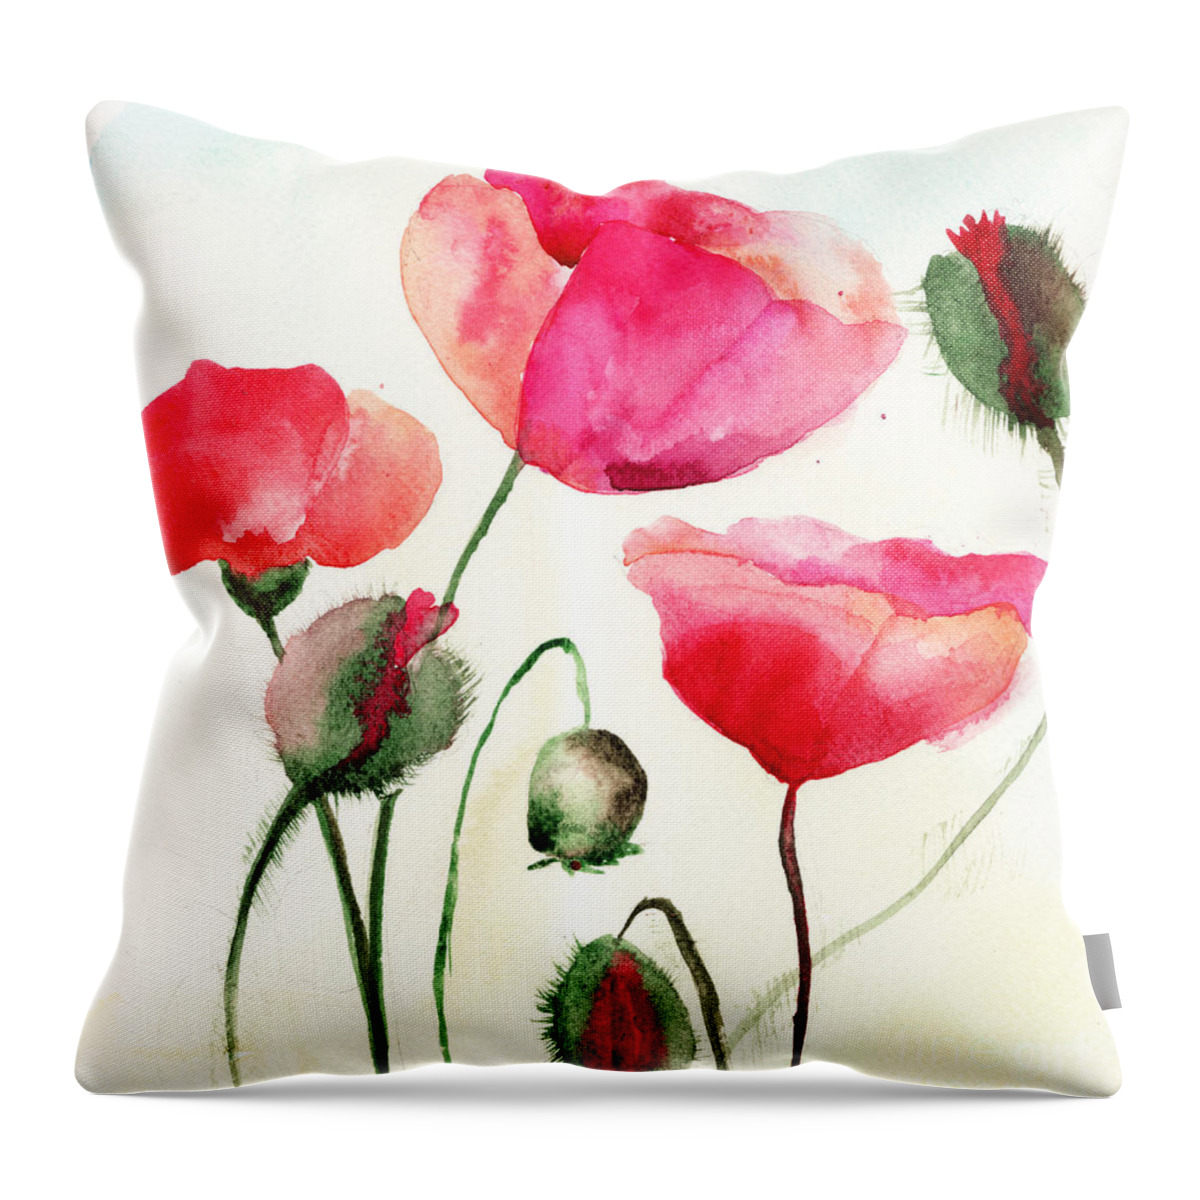 Backdrop Throw Pillow featuring the painting Stylized Poppy flowers illustration by Regina Jershova